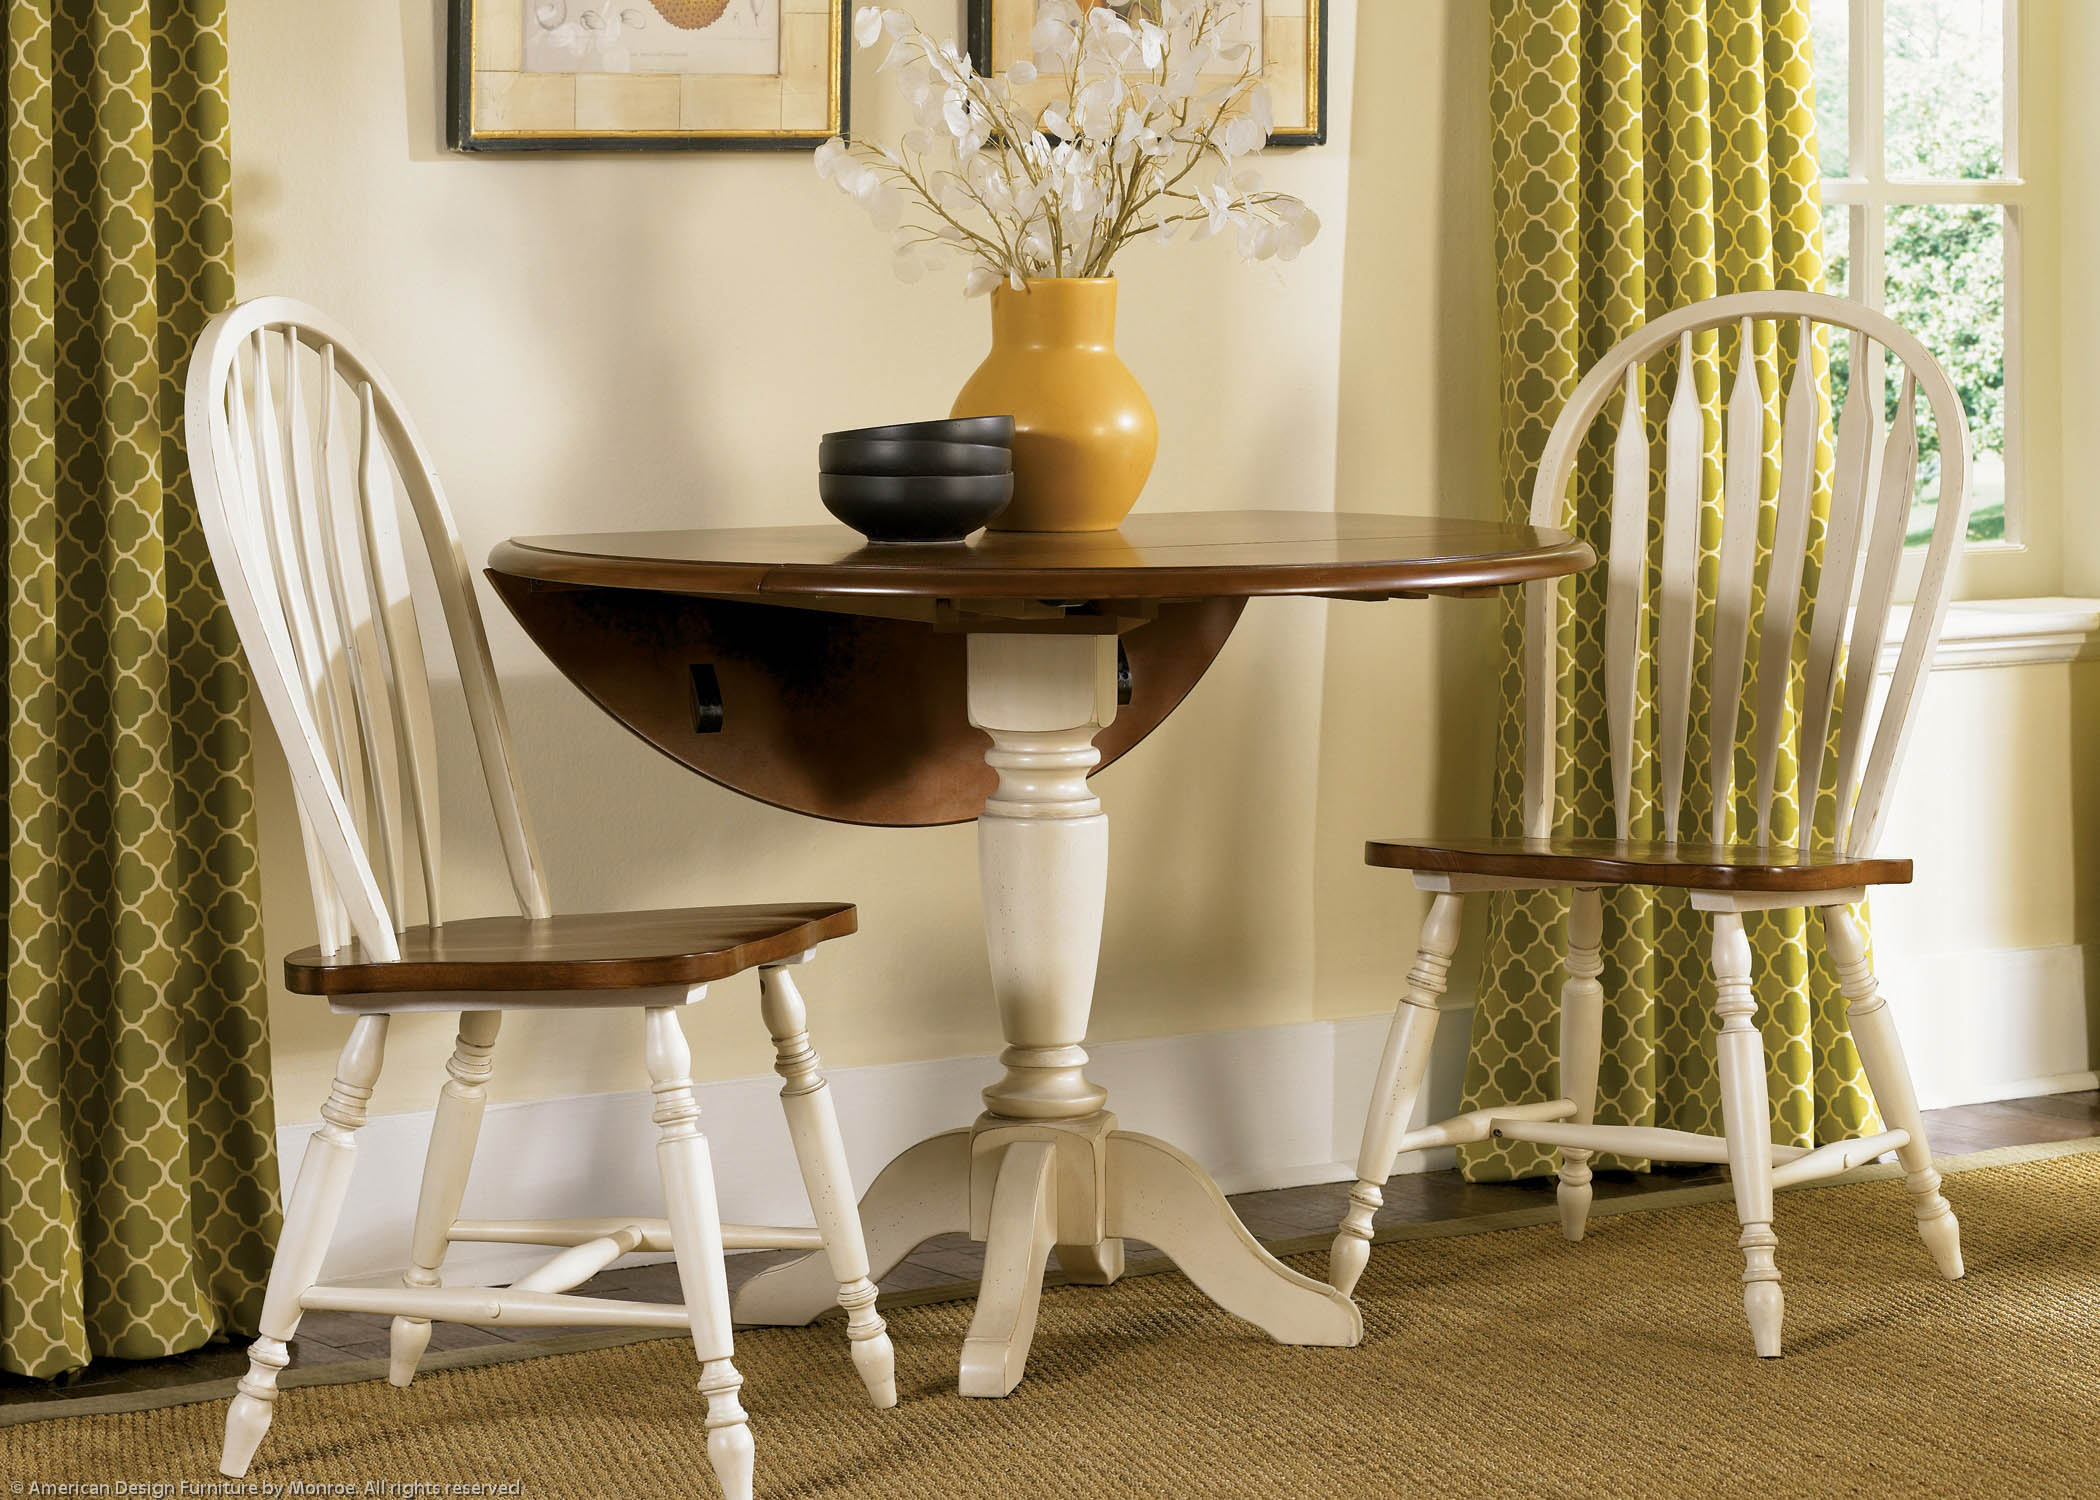 Charleston Casual Table Pic 1 (Heading Drop Leaf Pedestal Table)